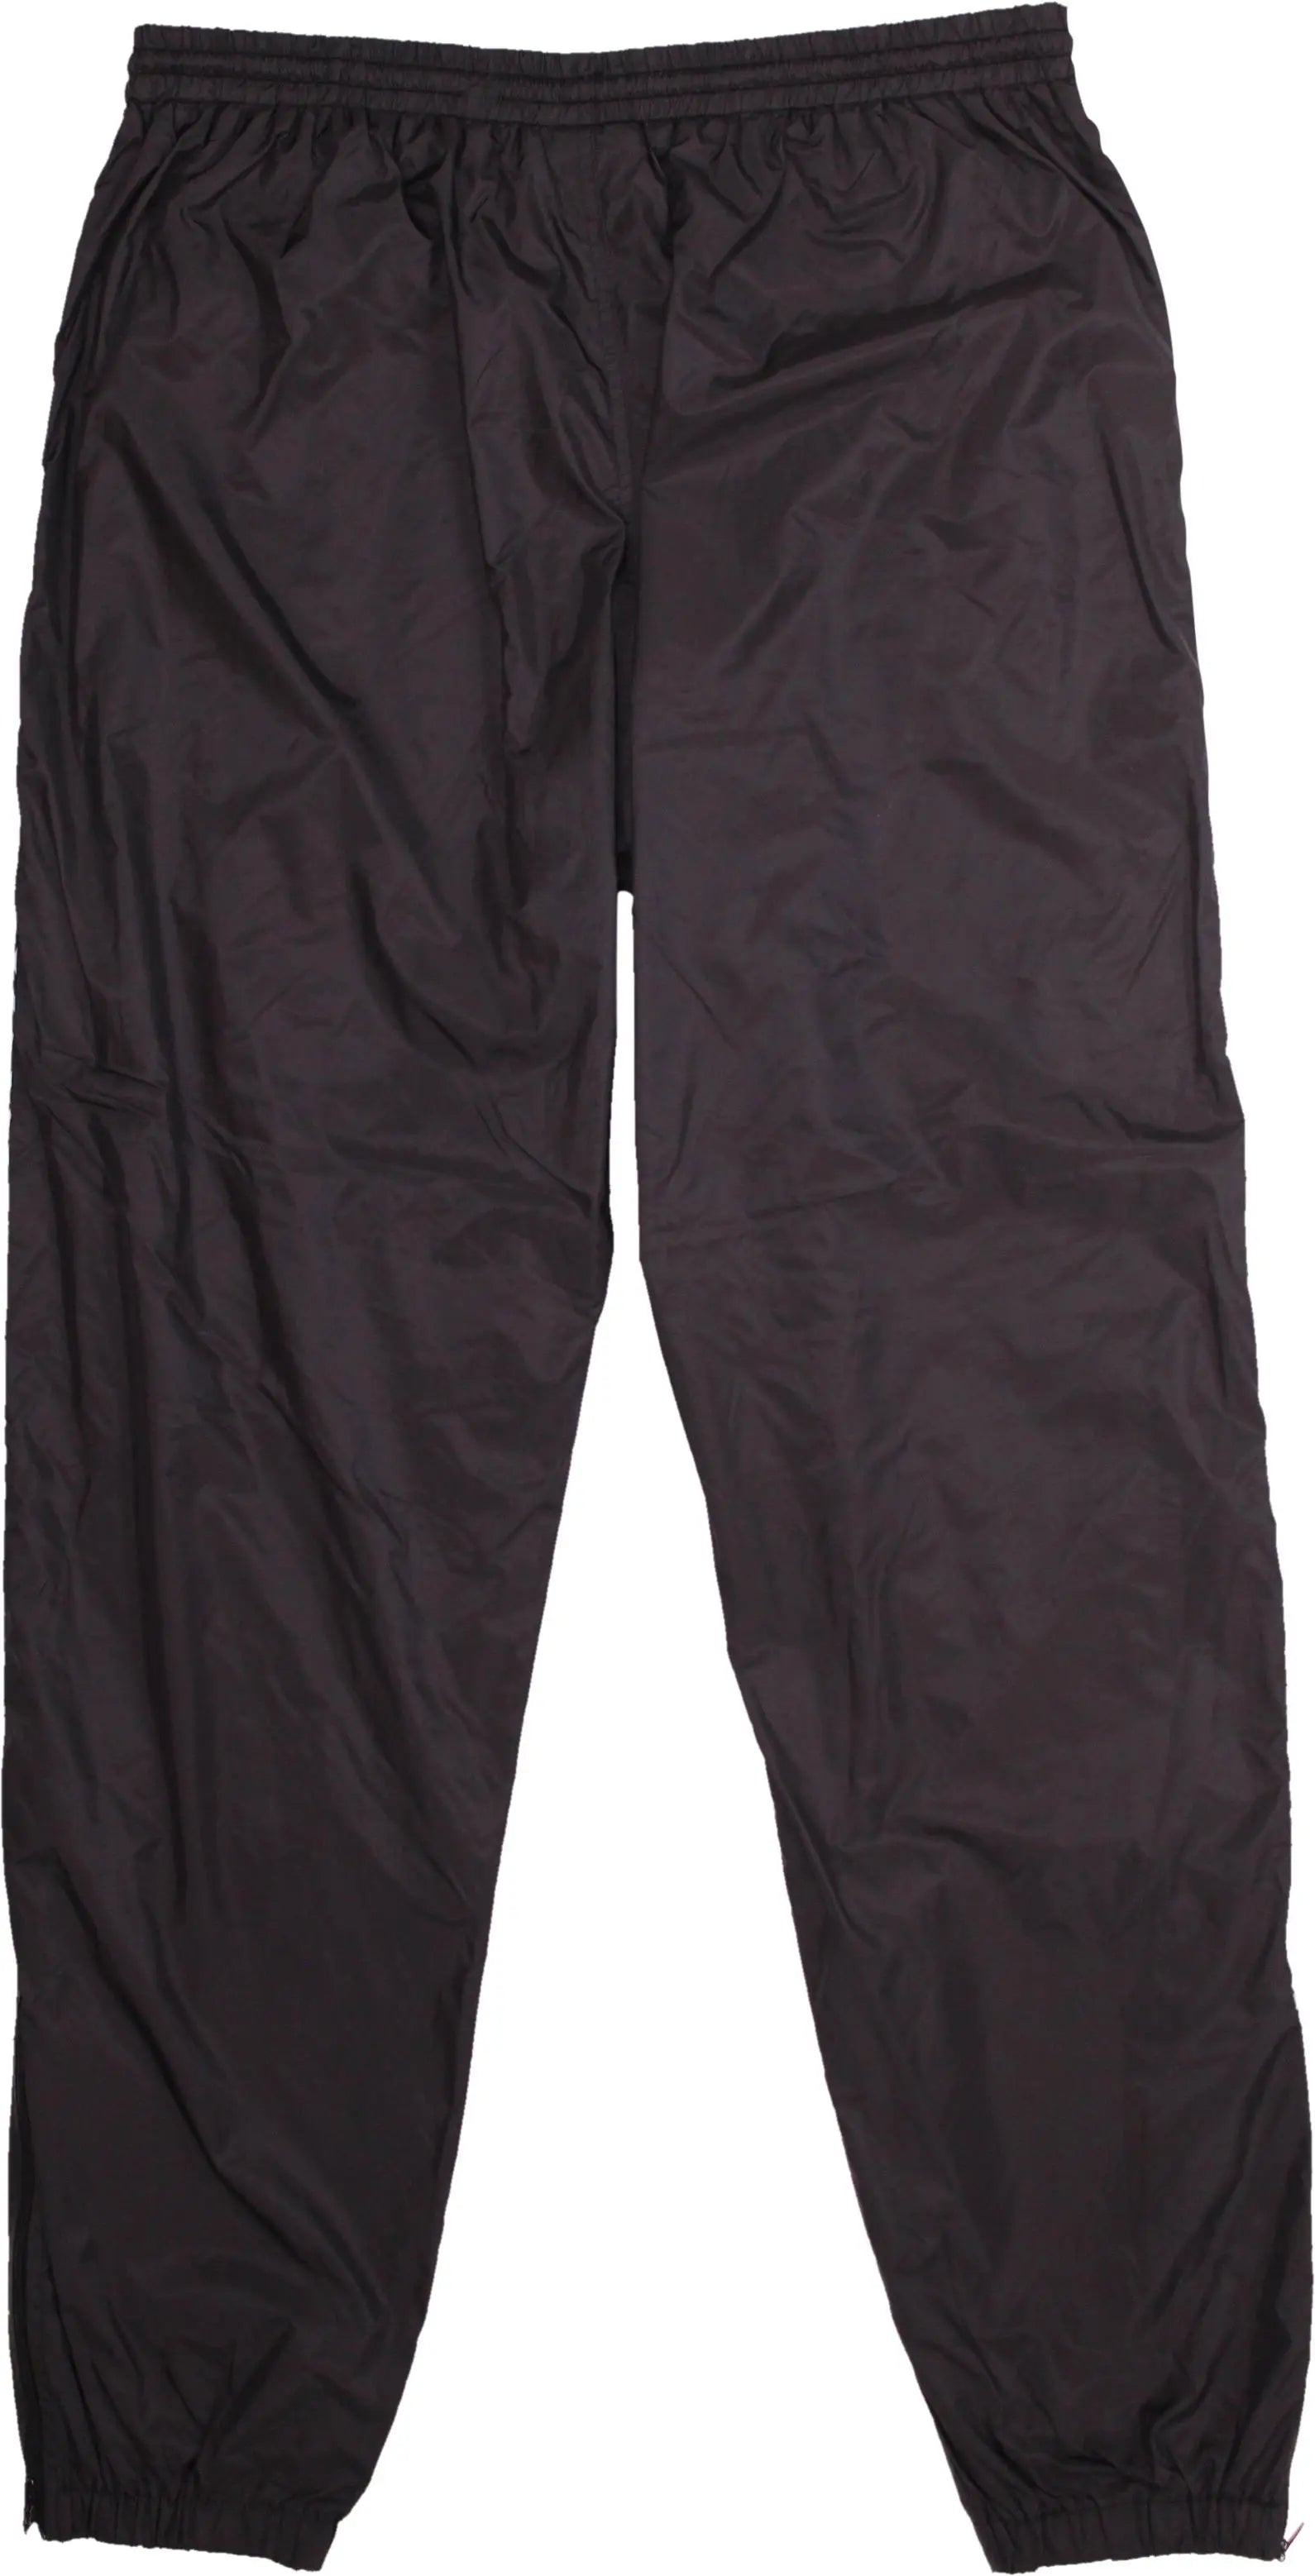 Umbro - Black Track Pants by Umbro- ThriftTale.com - Vintage and second handclothing